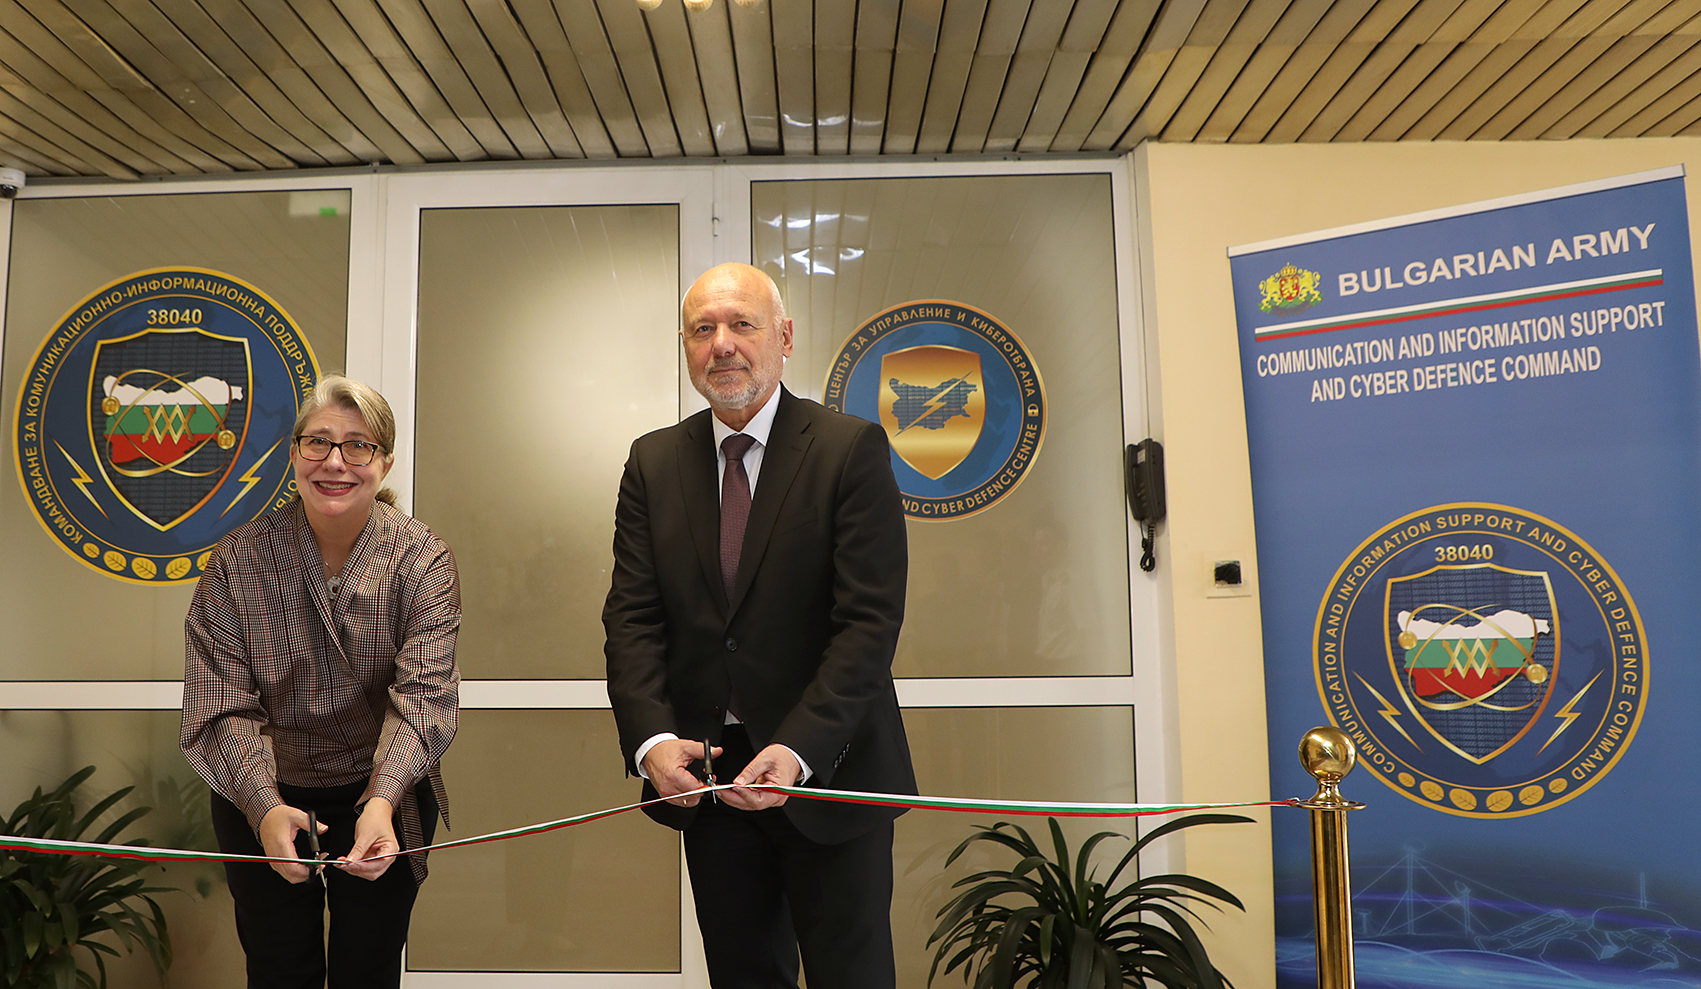 Acting US Ambassador Andrea Brulette-Rodriguez opens the Cyber and Bulgarian Defense Minister Todor Tagarev and Defense Center in Sofia